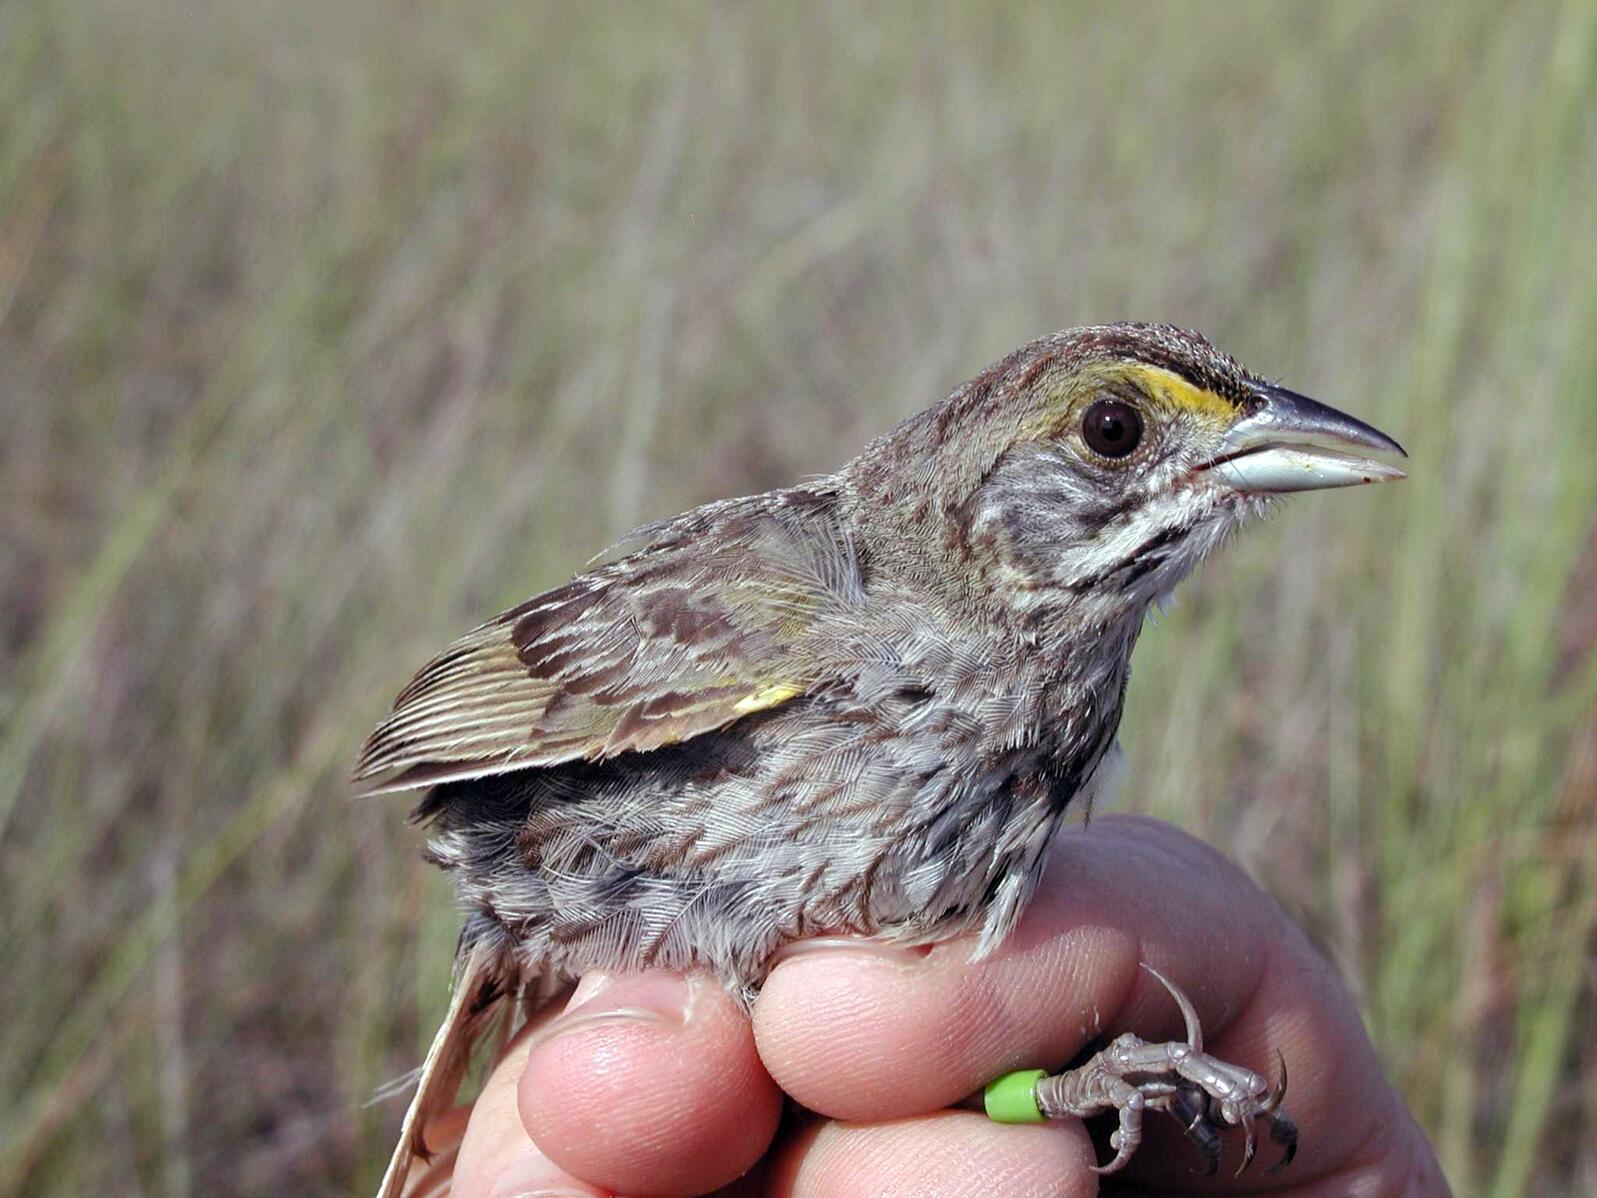 Cape Sable Seaside Sparrows are not an impediment to Everglades restoration. They depend on unique habitat in South Florida to survive. Photo: NPS/Lori Oberhofer